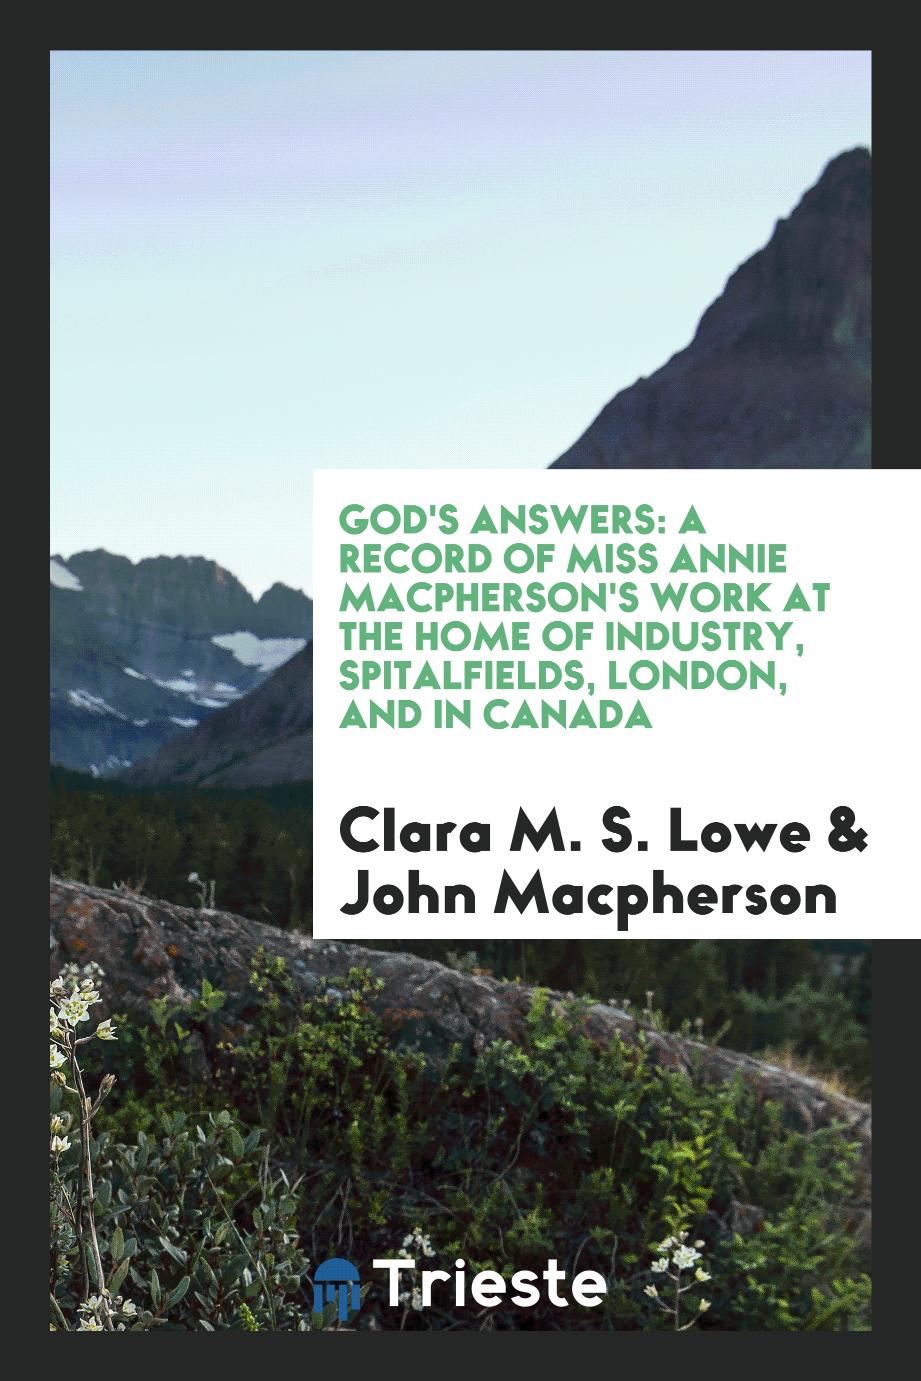 God's Answers: A Record of Miss Annie Macpherson's Work at the Home of Industry, Spitalfields, London, and in Canada